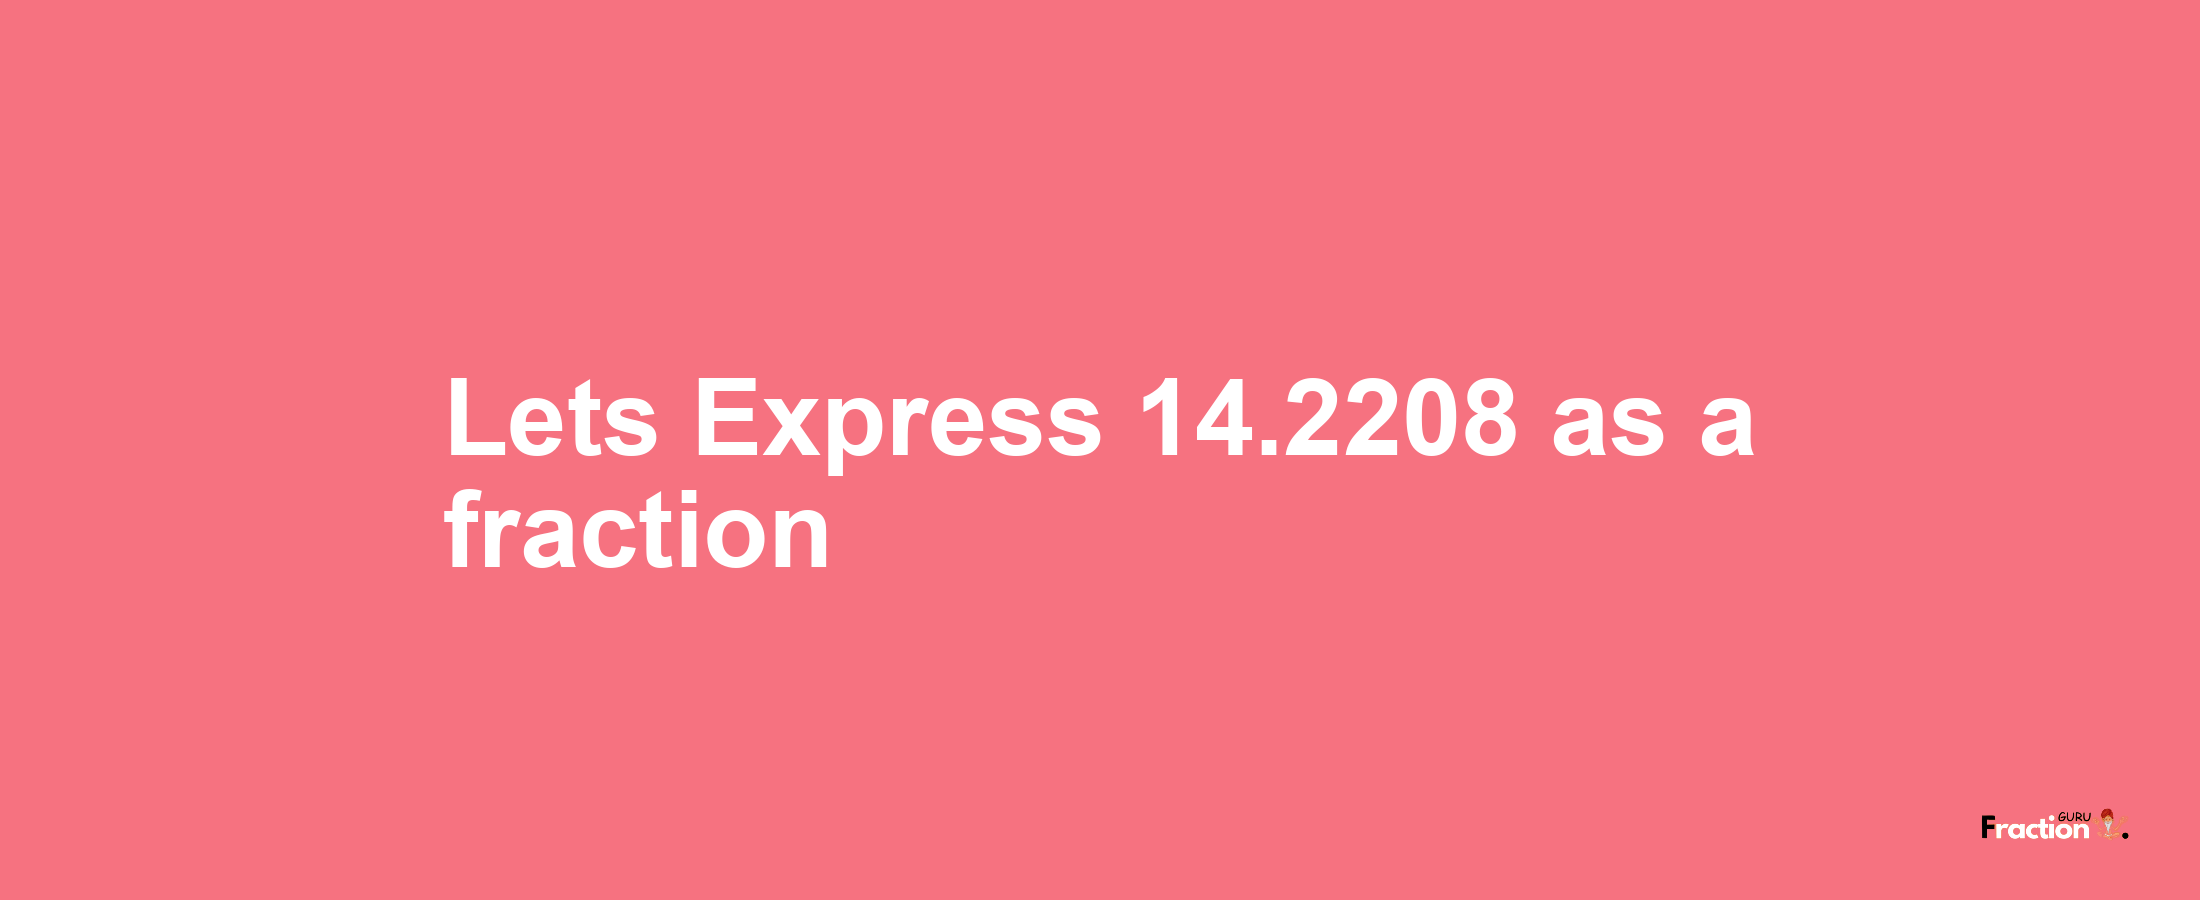 Lets Express 14.2208 as afraction